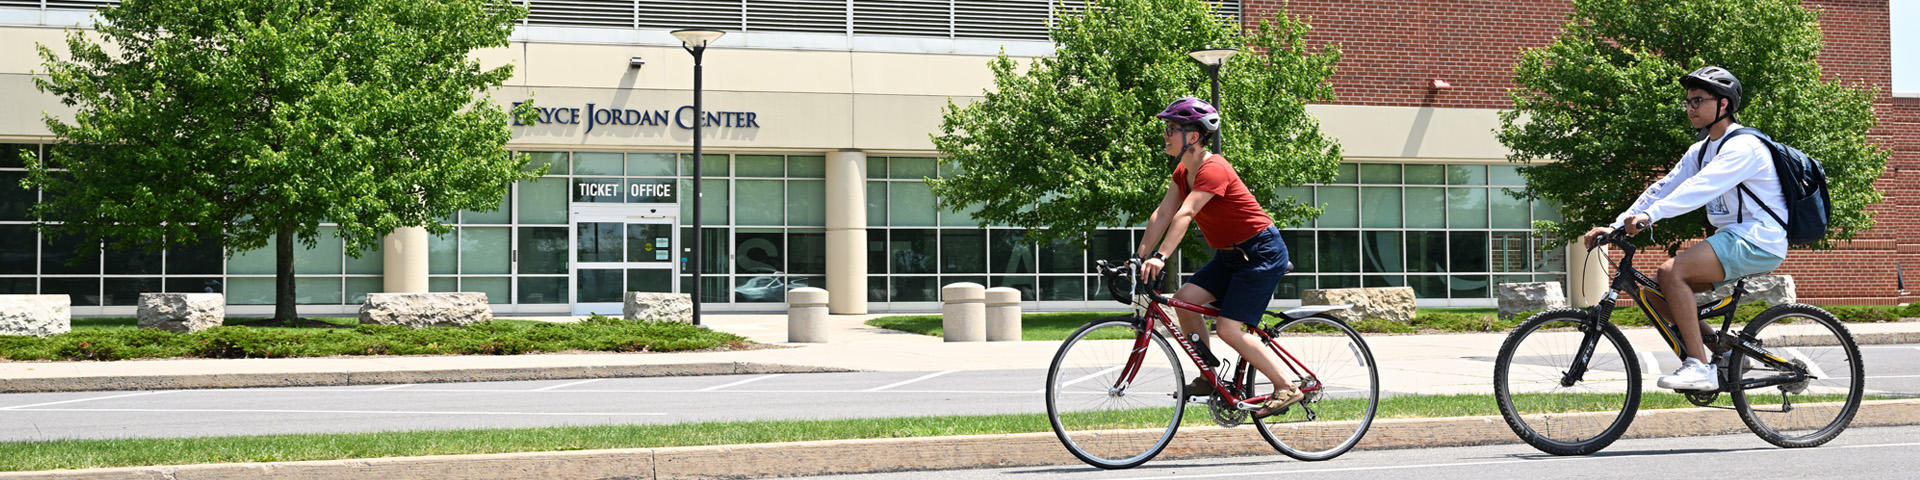 Cyclists riding in front of the Bryce Jordan Center